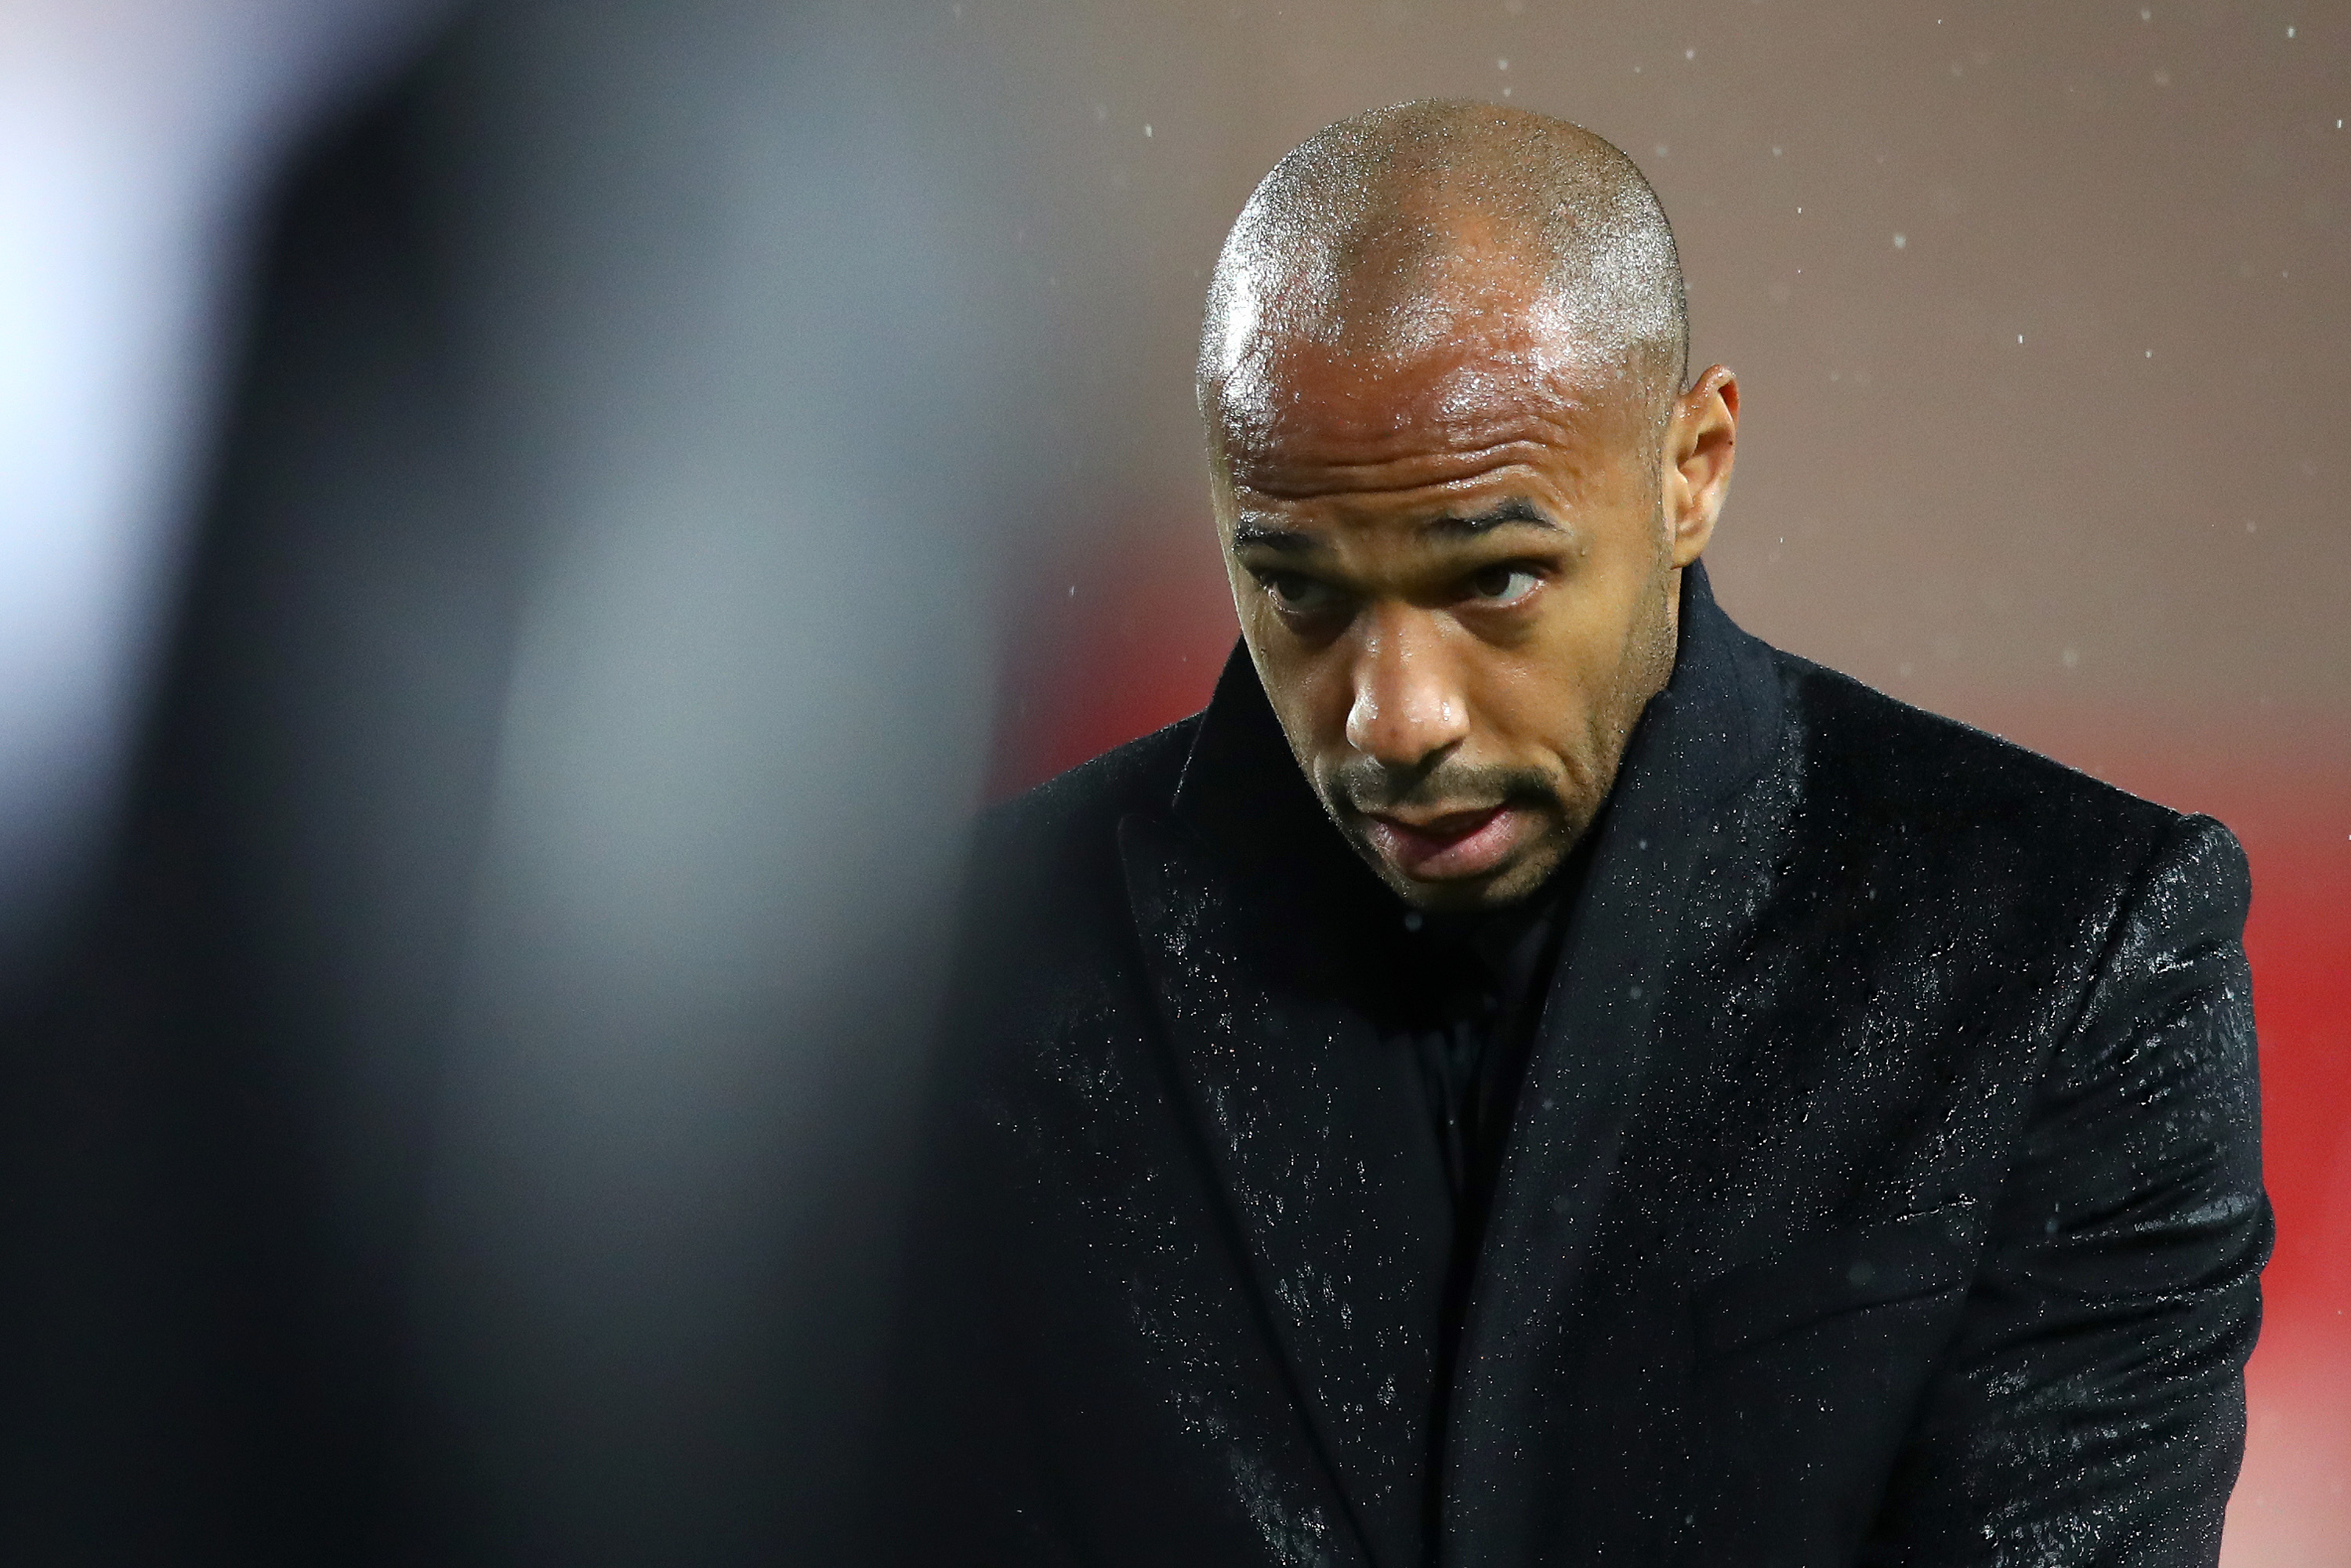 MONACO - NOVEMBER 06:  Thierry Henry, Manager of Monaco looks on during the Group A match of the UEFA Champions League between AS Monaco and Club Brugge at Stade Louis II on November 6, 2018 in Monaco, Monaco.  (Photo by Michael Steele/Getty Images)